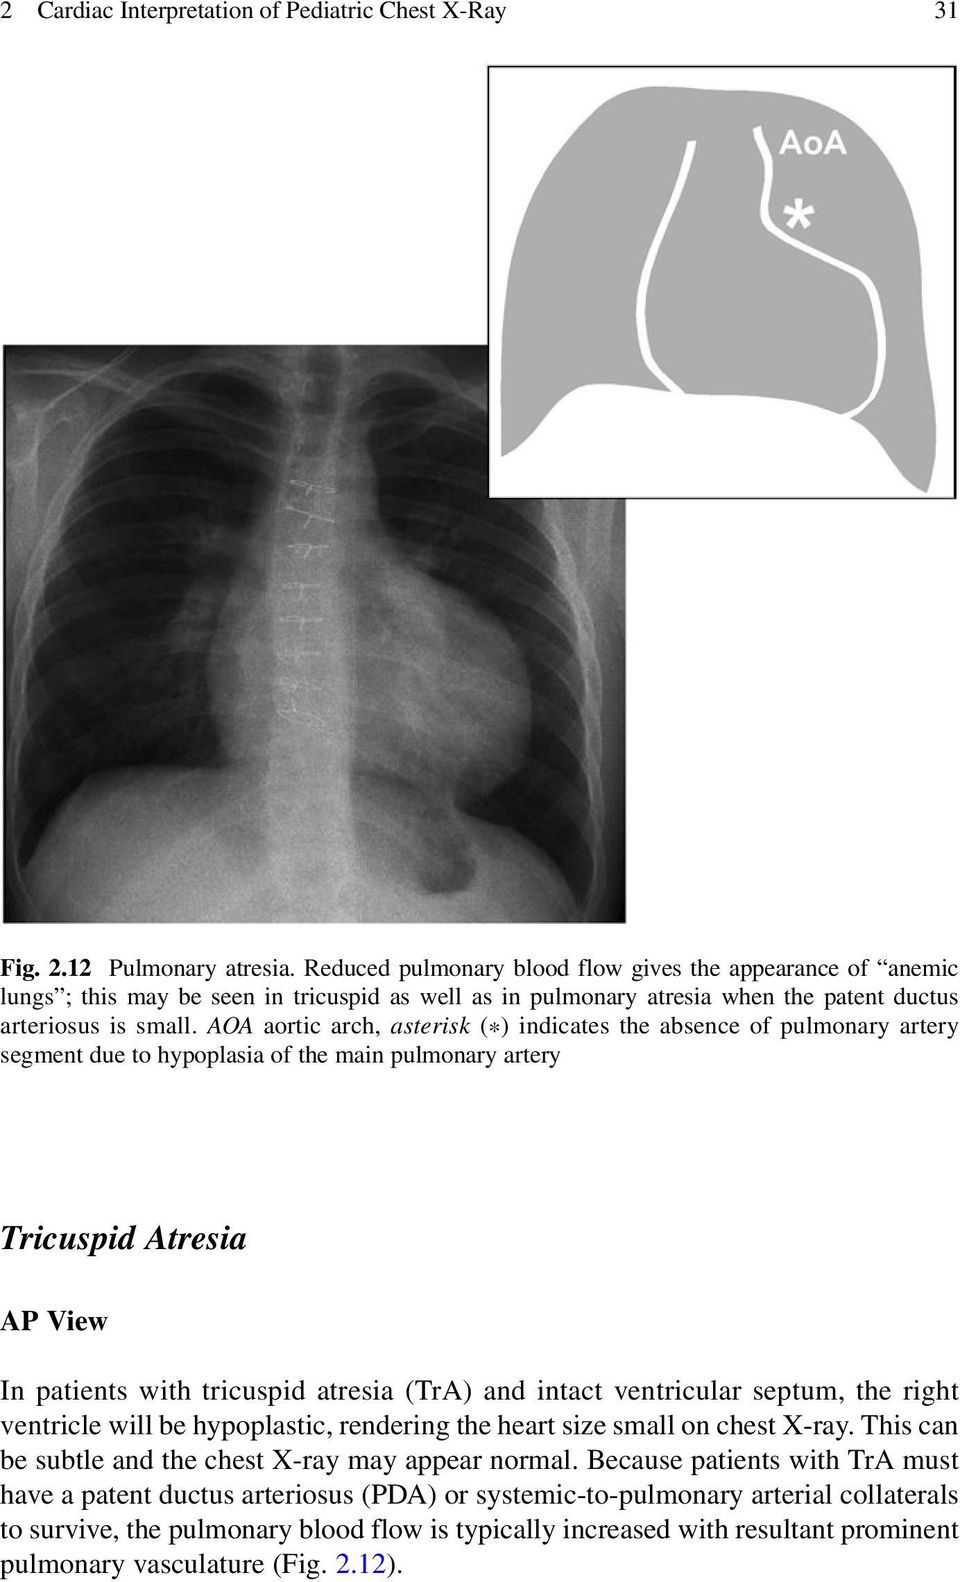 AOA aortic arch, asterisk (*) indicates the absence of pulmonary artery segment due to hypoplasia of the main pulmonary artery Tricuspid Atresia In patients with tricuspid atresia (TrA) and intact